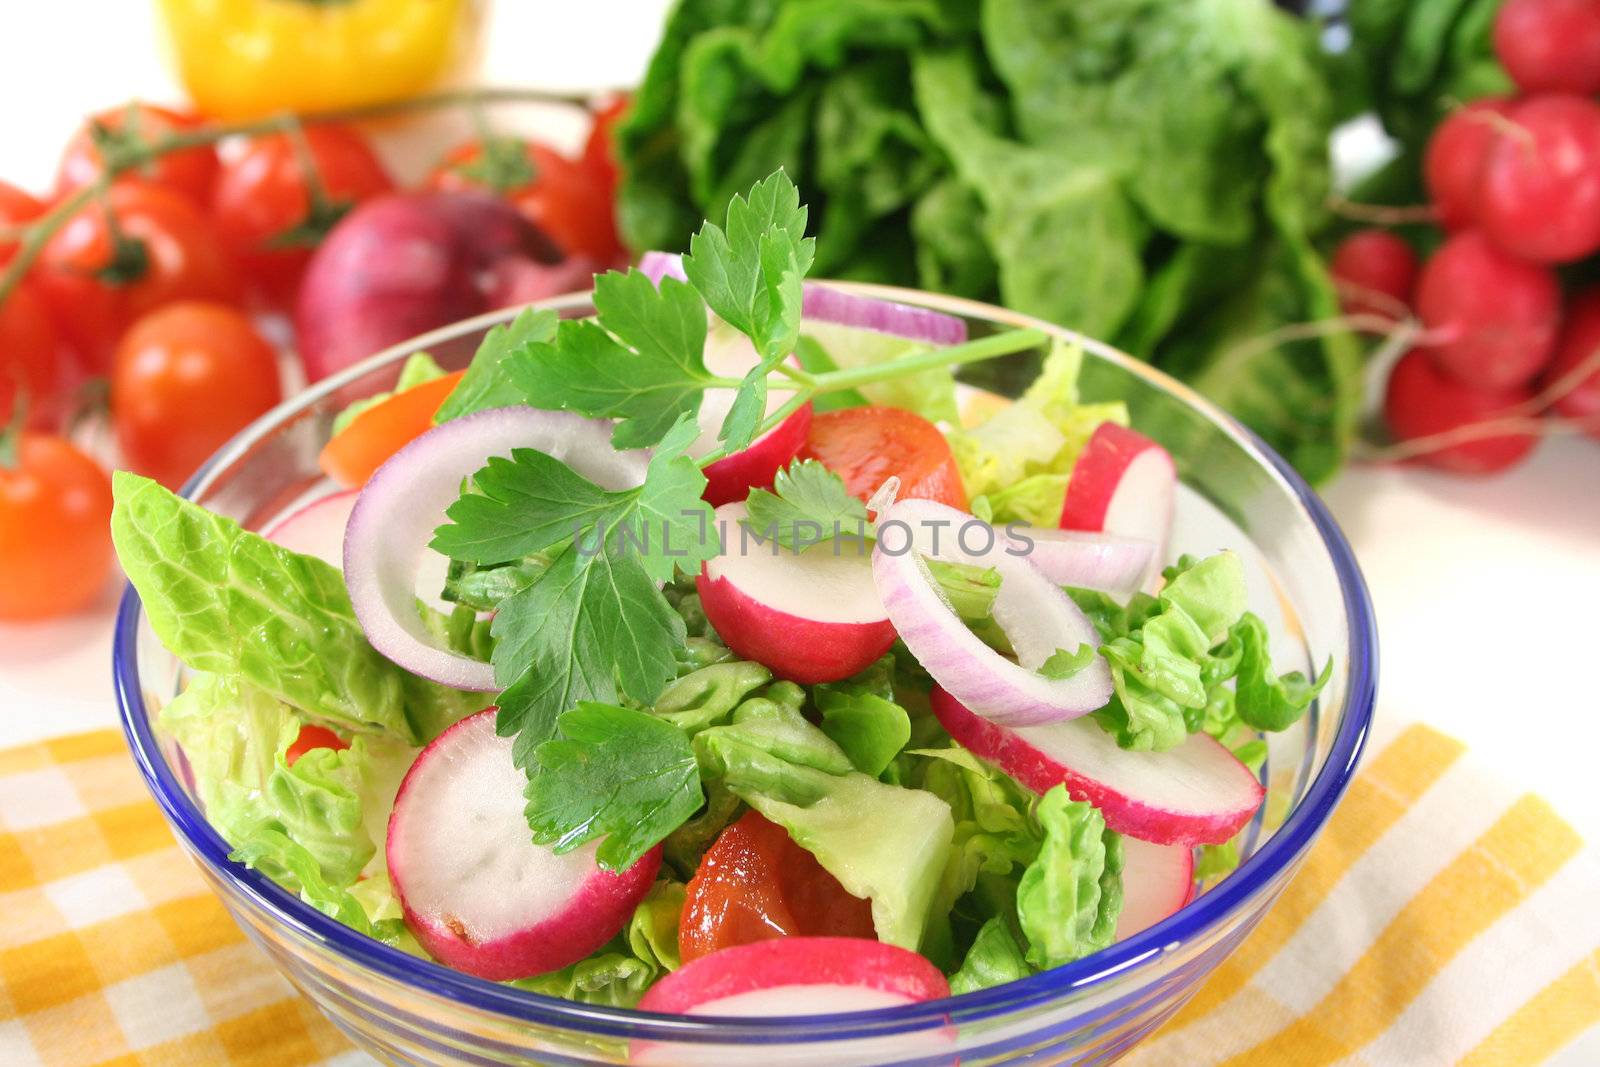 mixed salad with lettuce, radishes, tomatoes and parsley